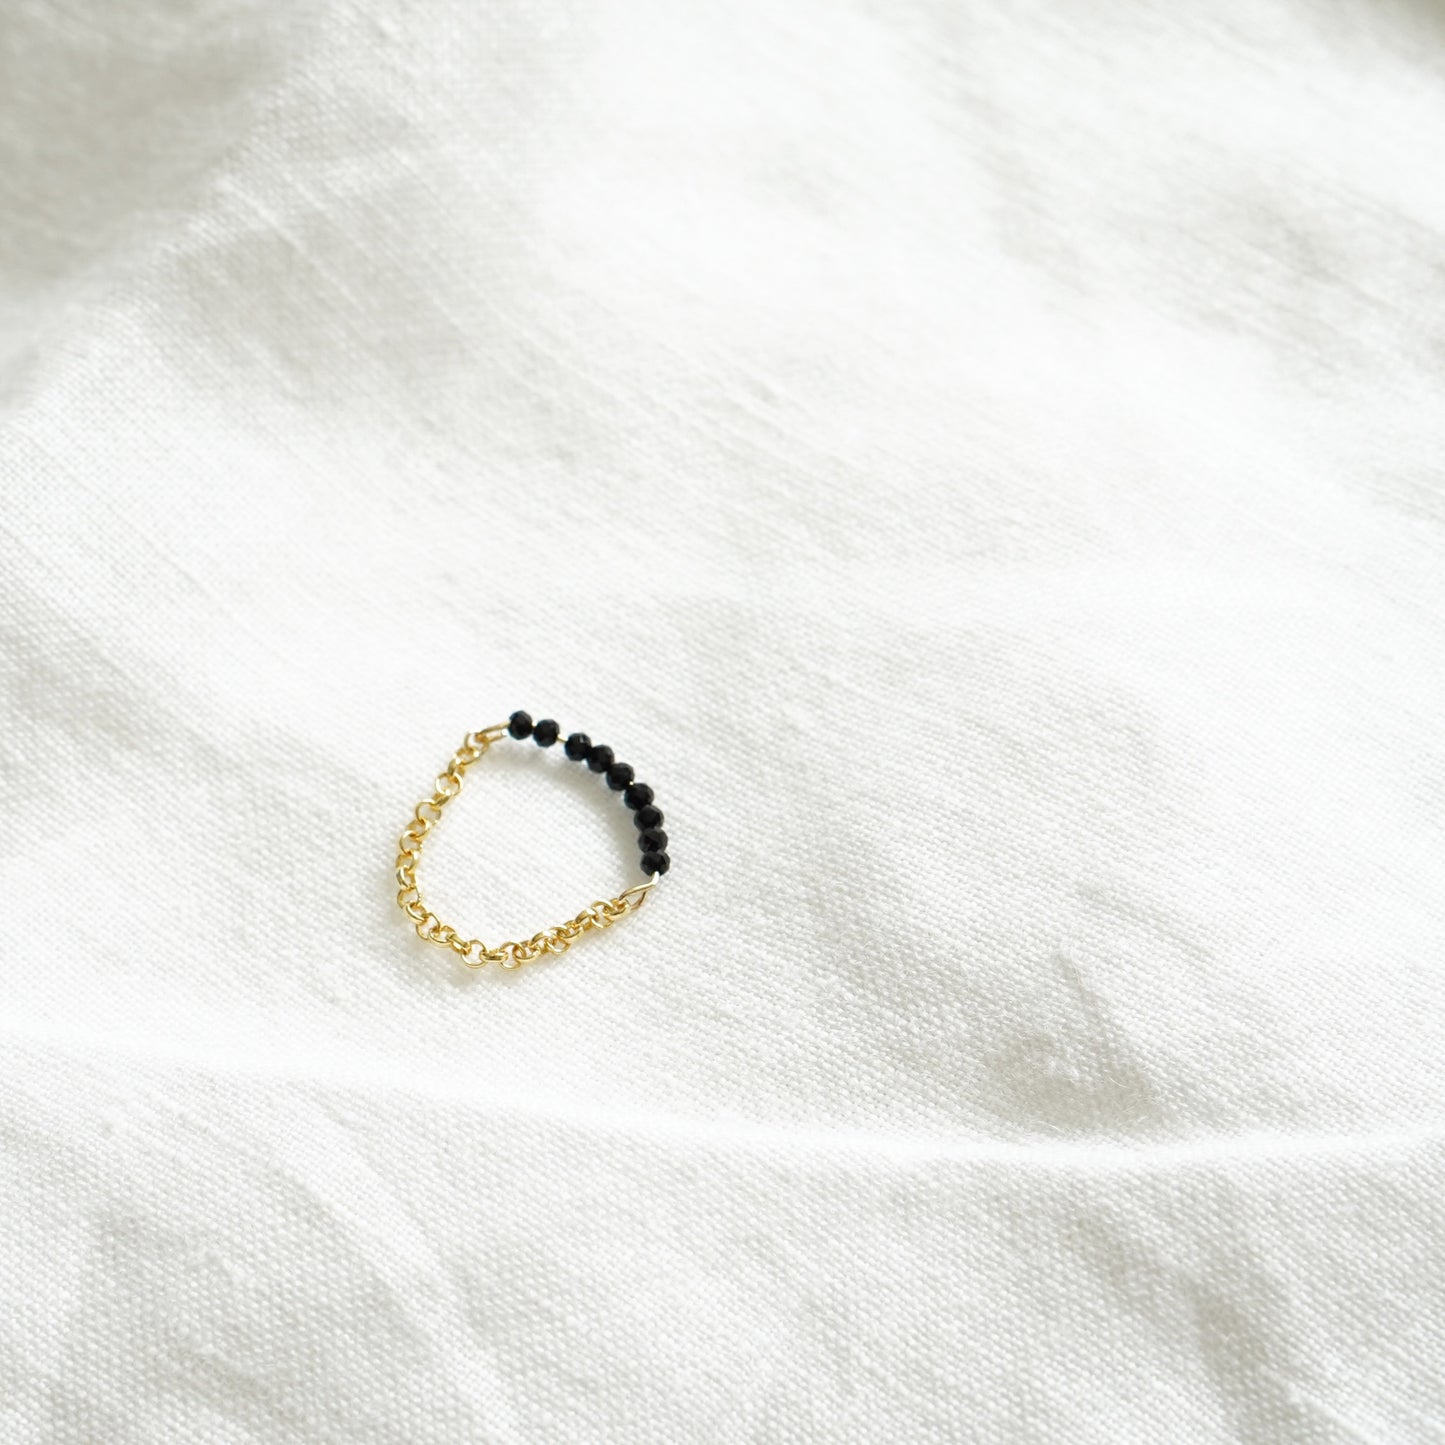 Gold Chain ring- Black Spinel